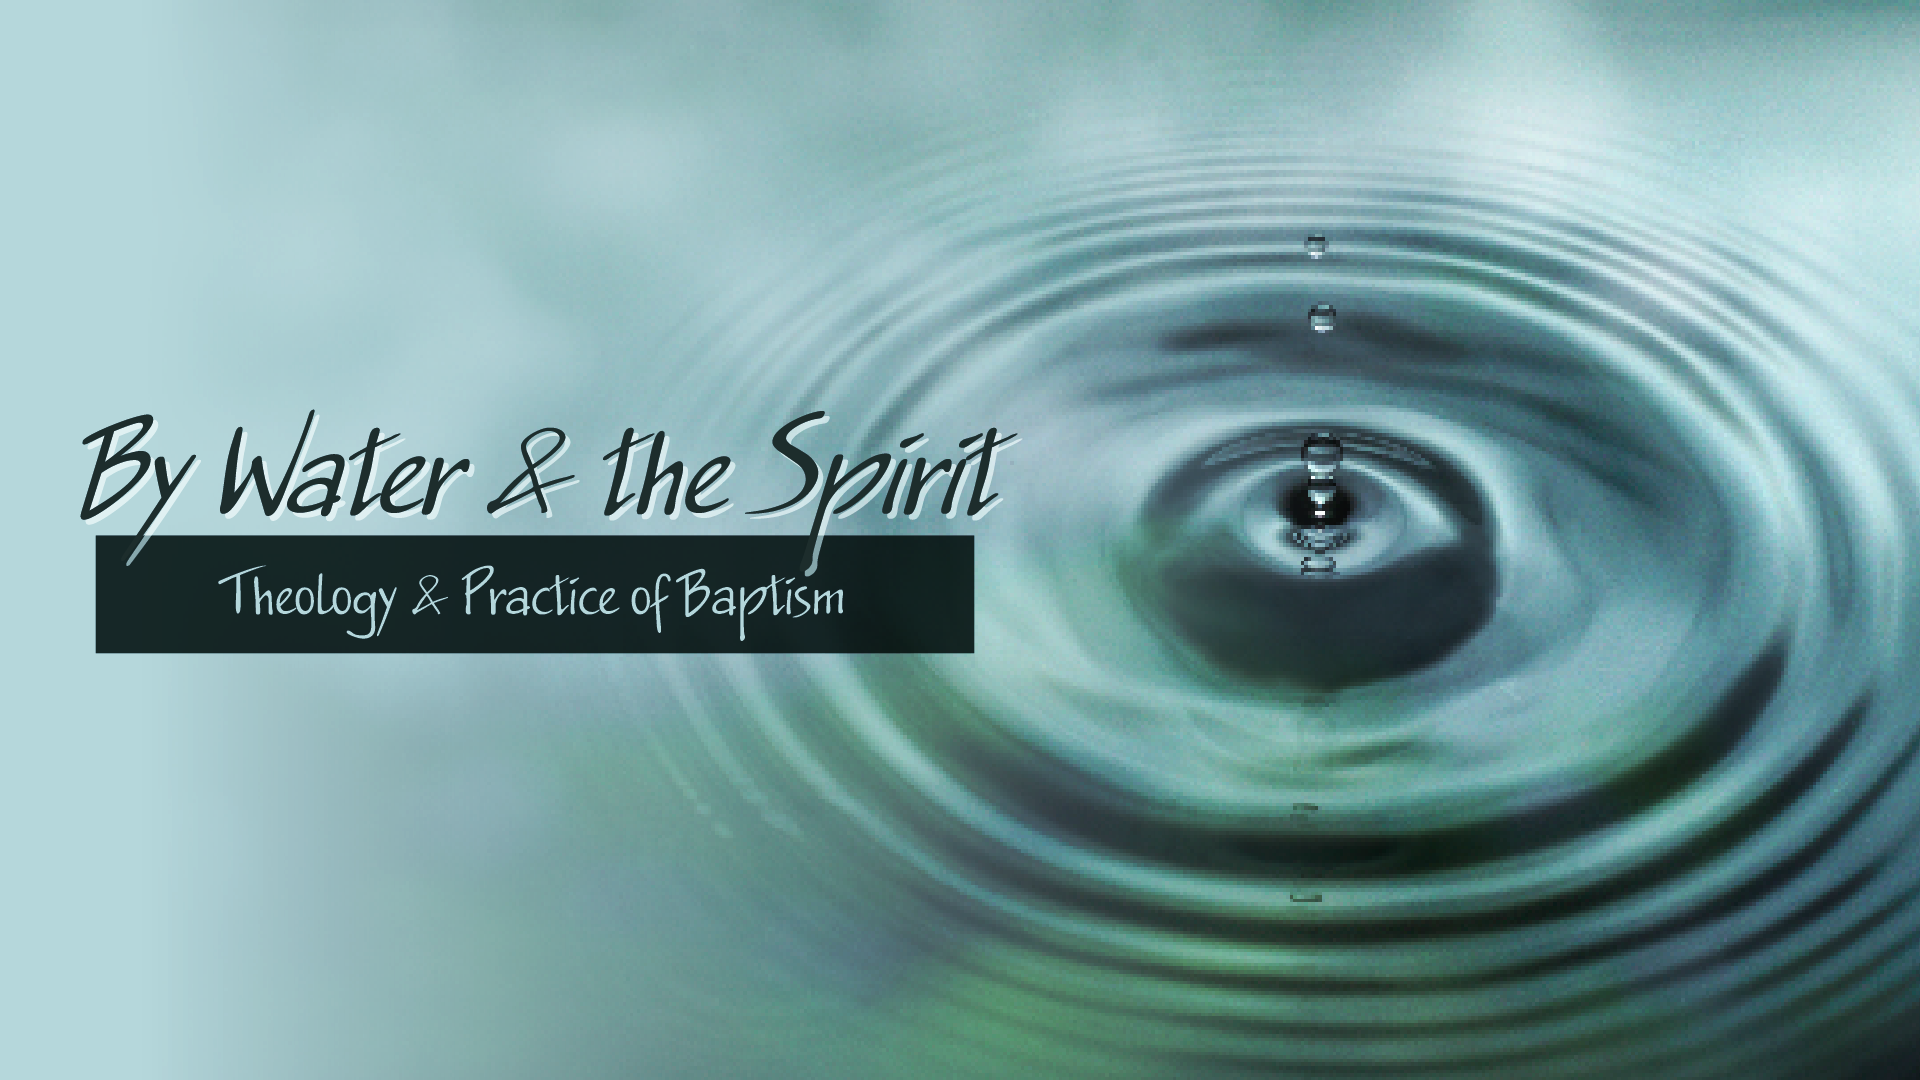 Featured image for “By Water & the Spirit: Theology & Practice of Baptism”